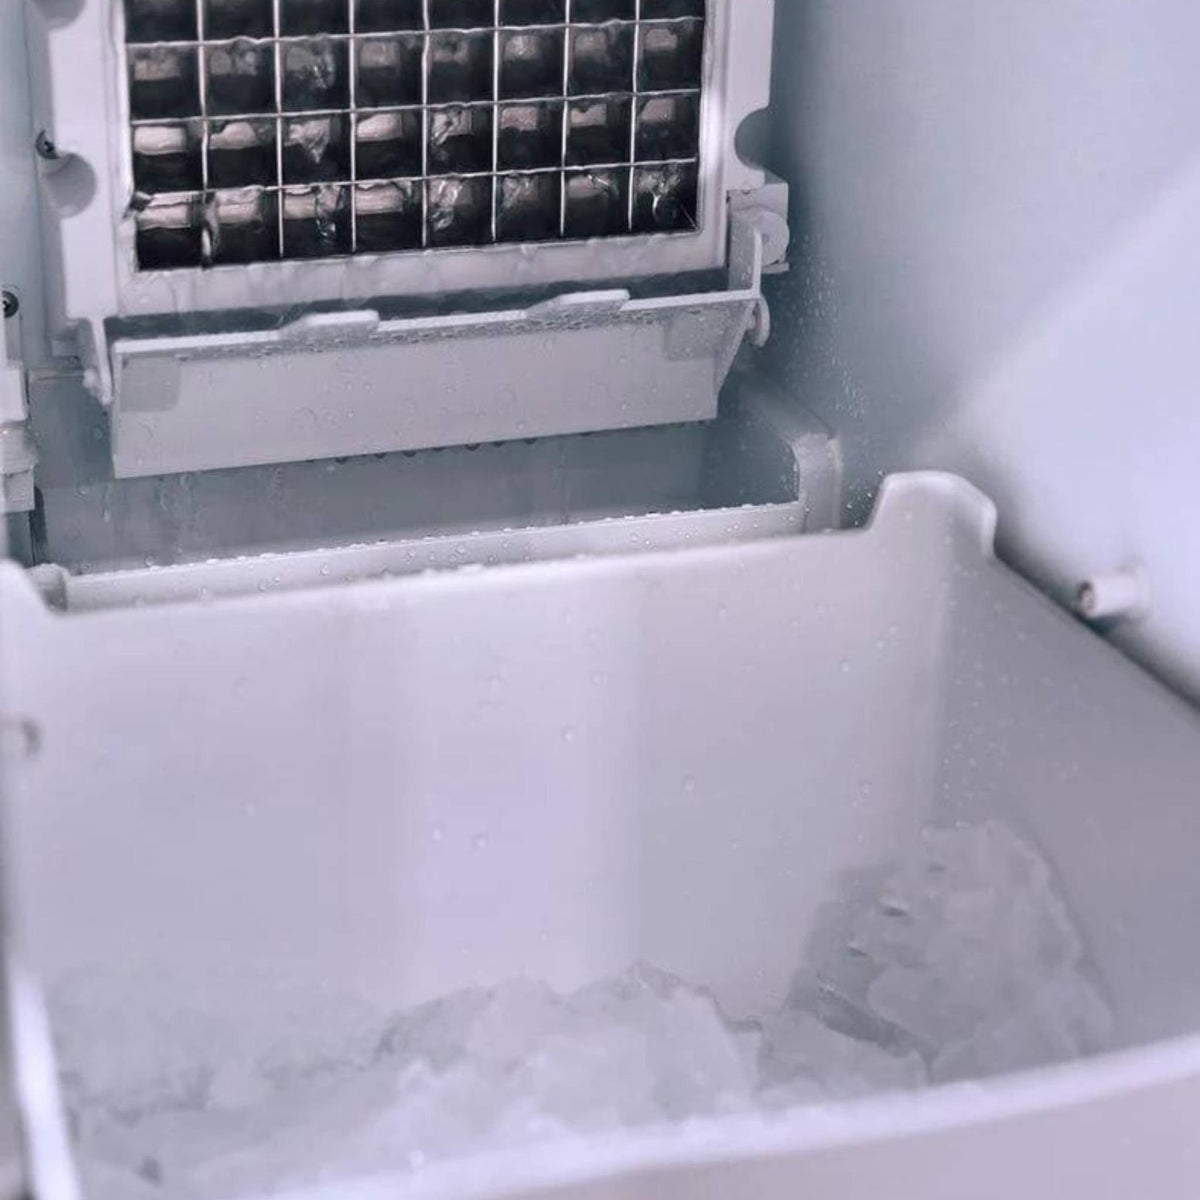 Summerset 15&quot; UL Outdoor Rated Ice Maker w/Stainless Door - 50 lb. Capacity - Culinary Hardware